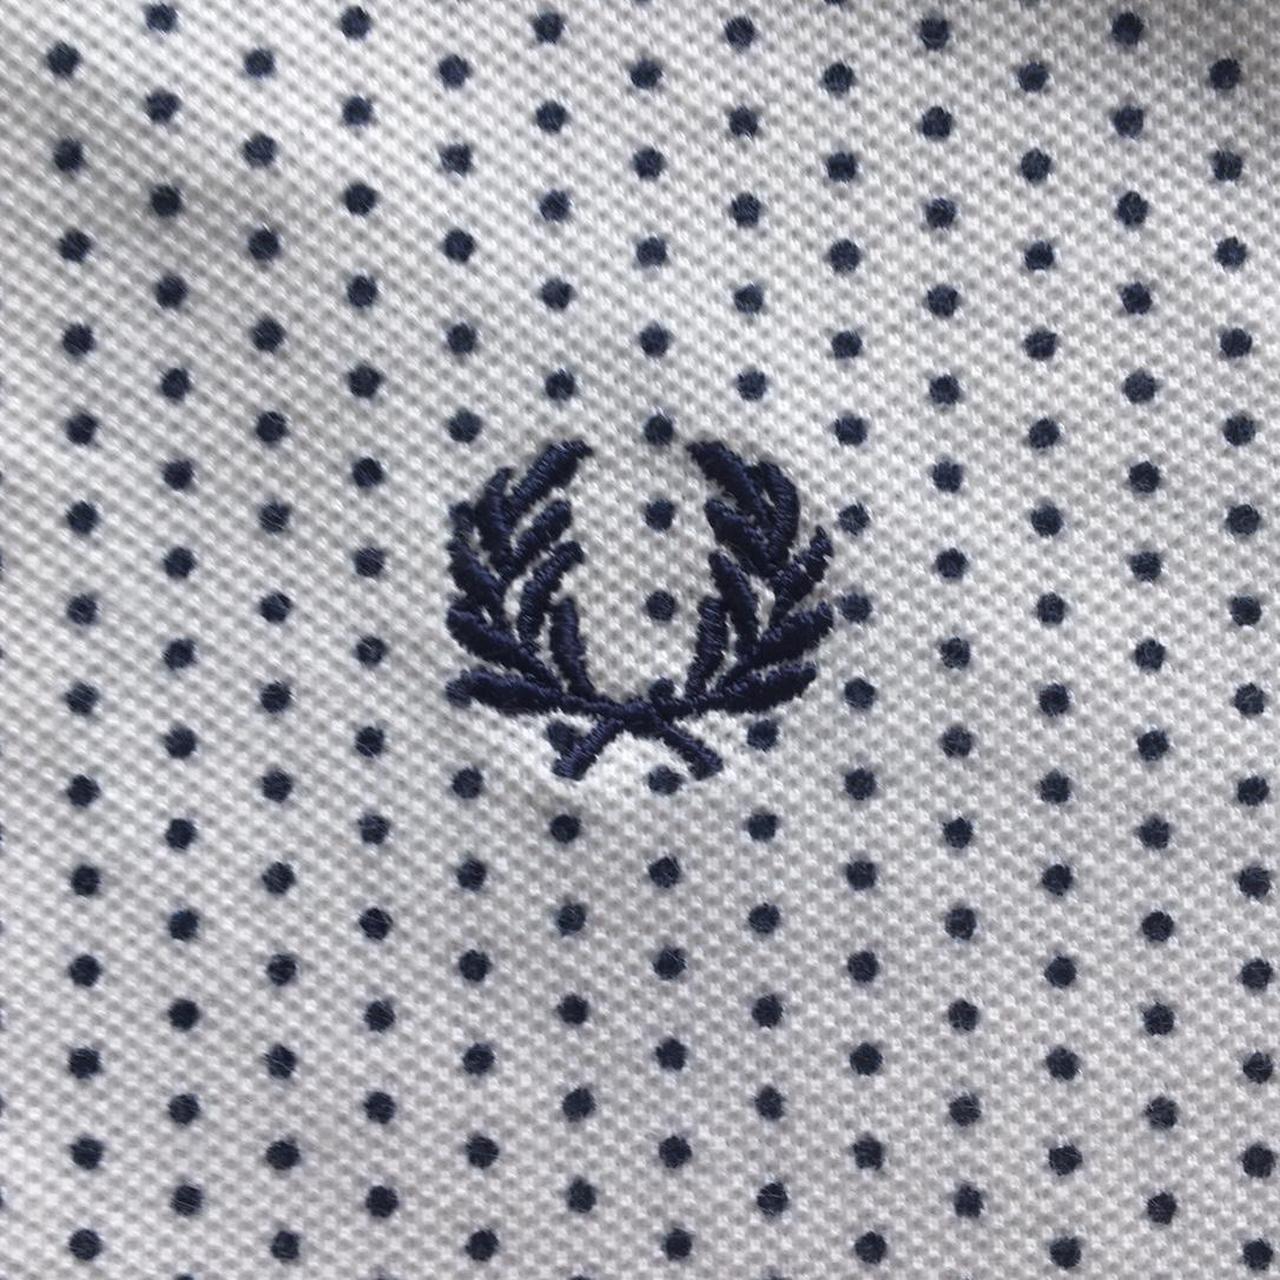 Fred Perry Men's White and Black Polo-shirts | Depop